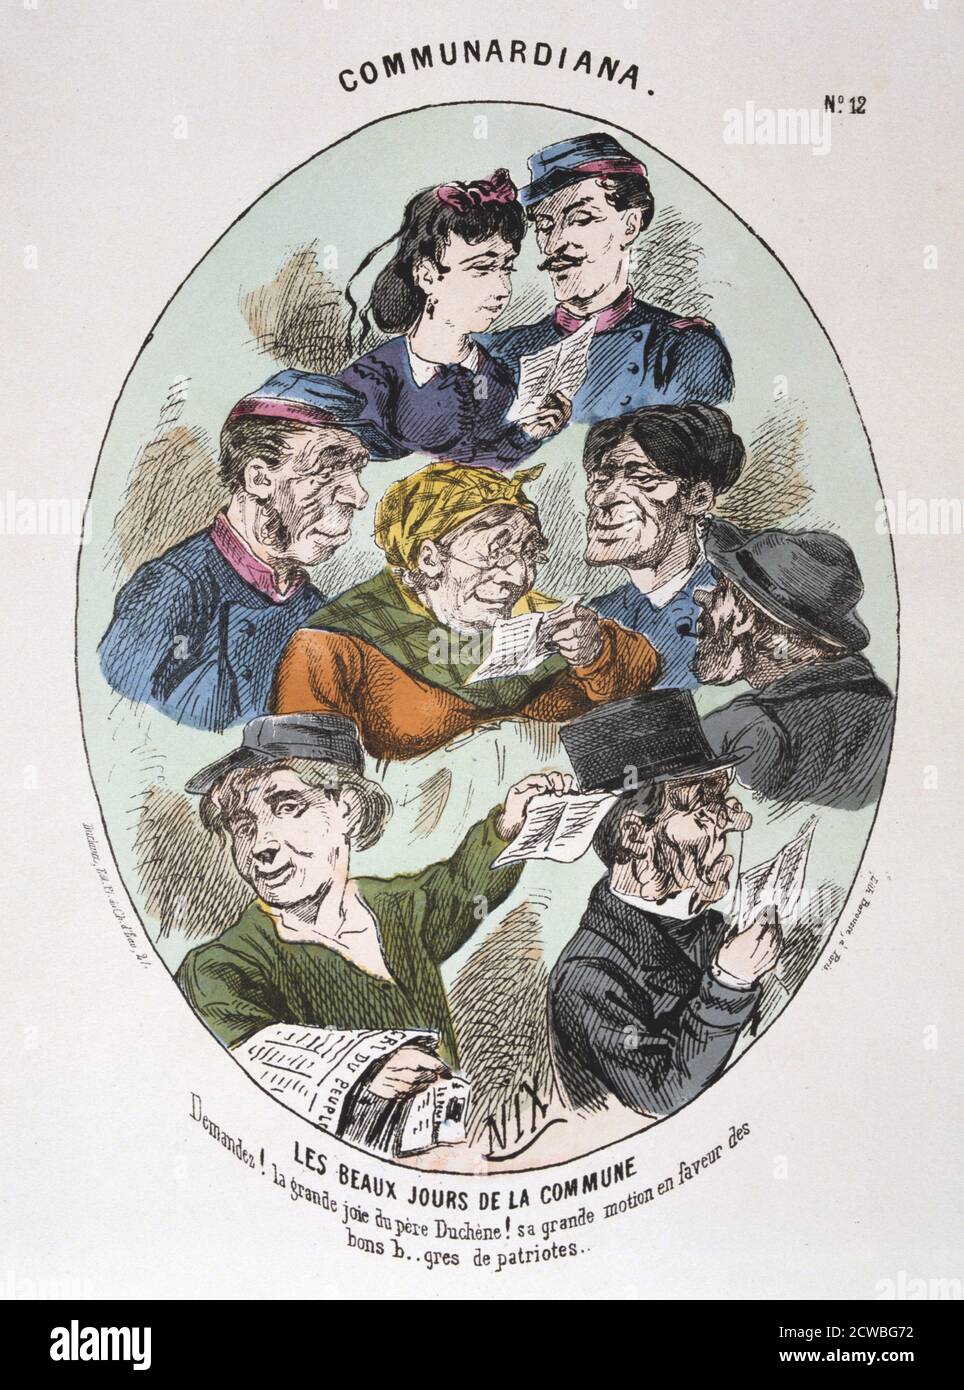 Les Beaux Jours de la Commune', 1871. Cartoon from a series on the subject of the Paris Commune of March to May 1871 titled Communardiana. From a private collection. Stock Photo